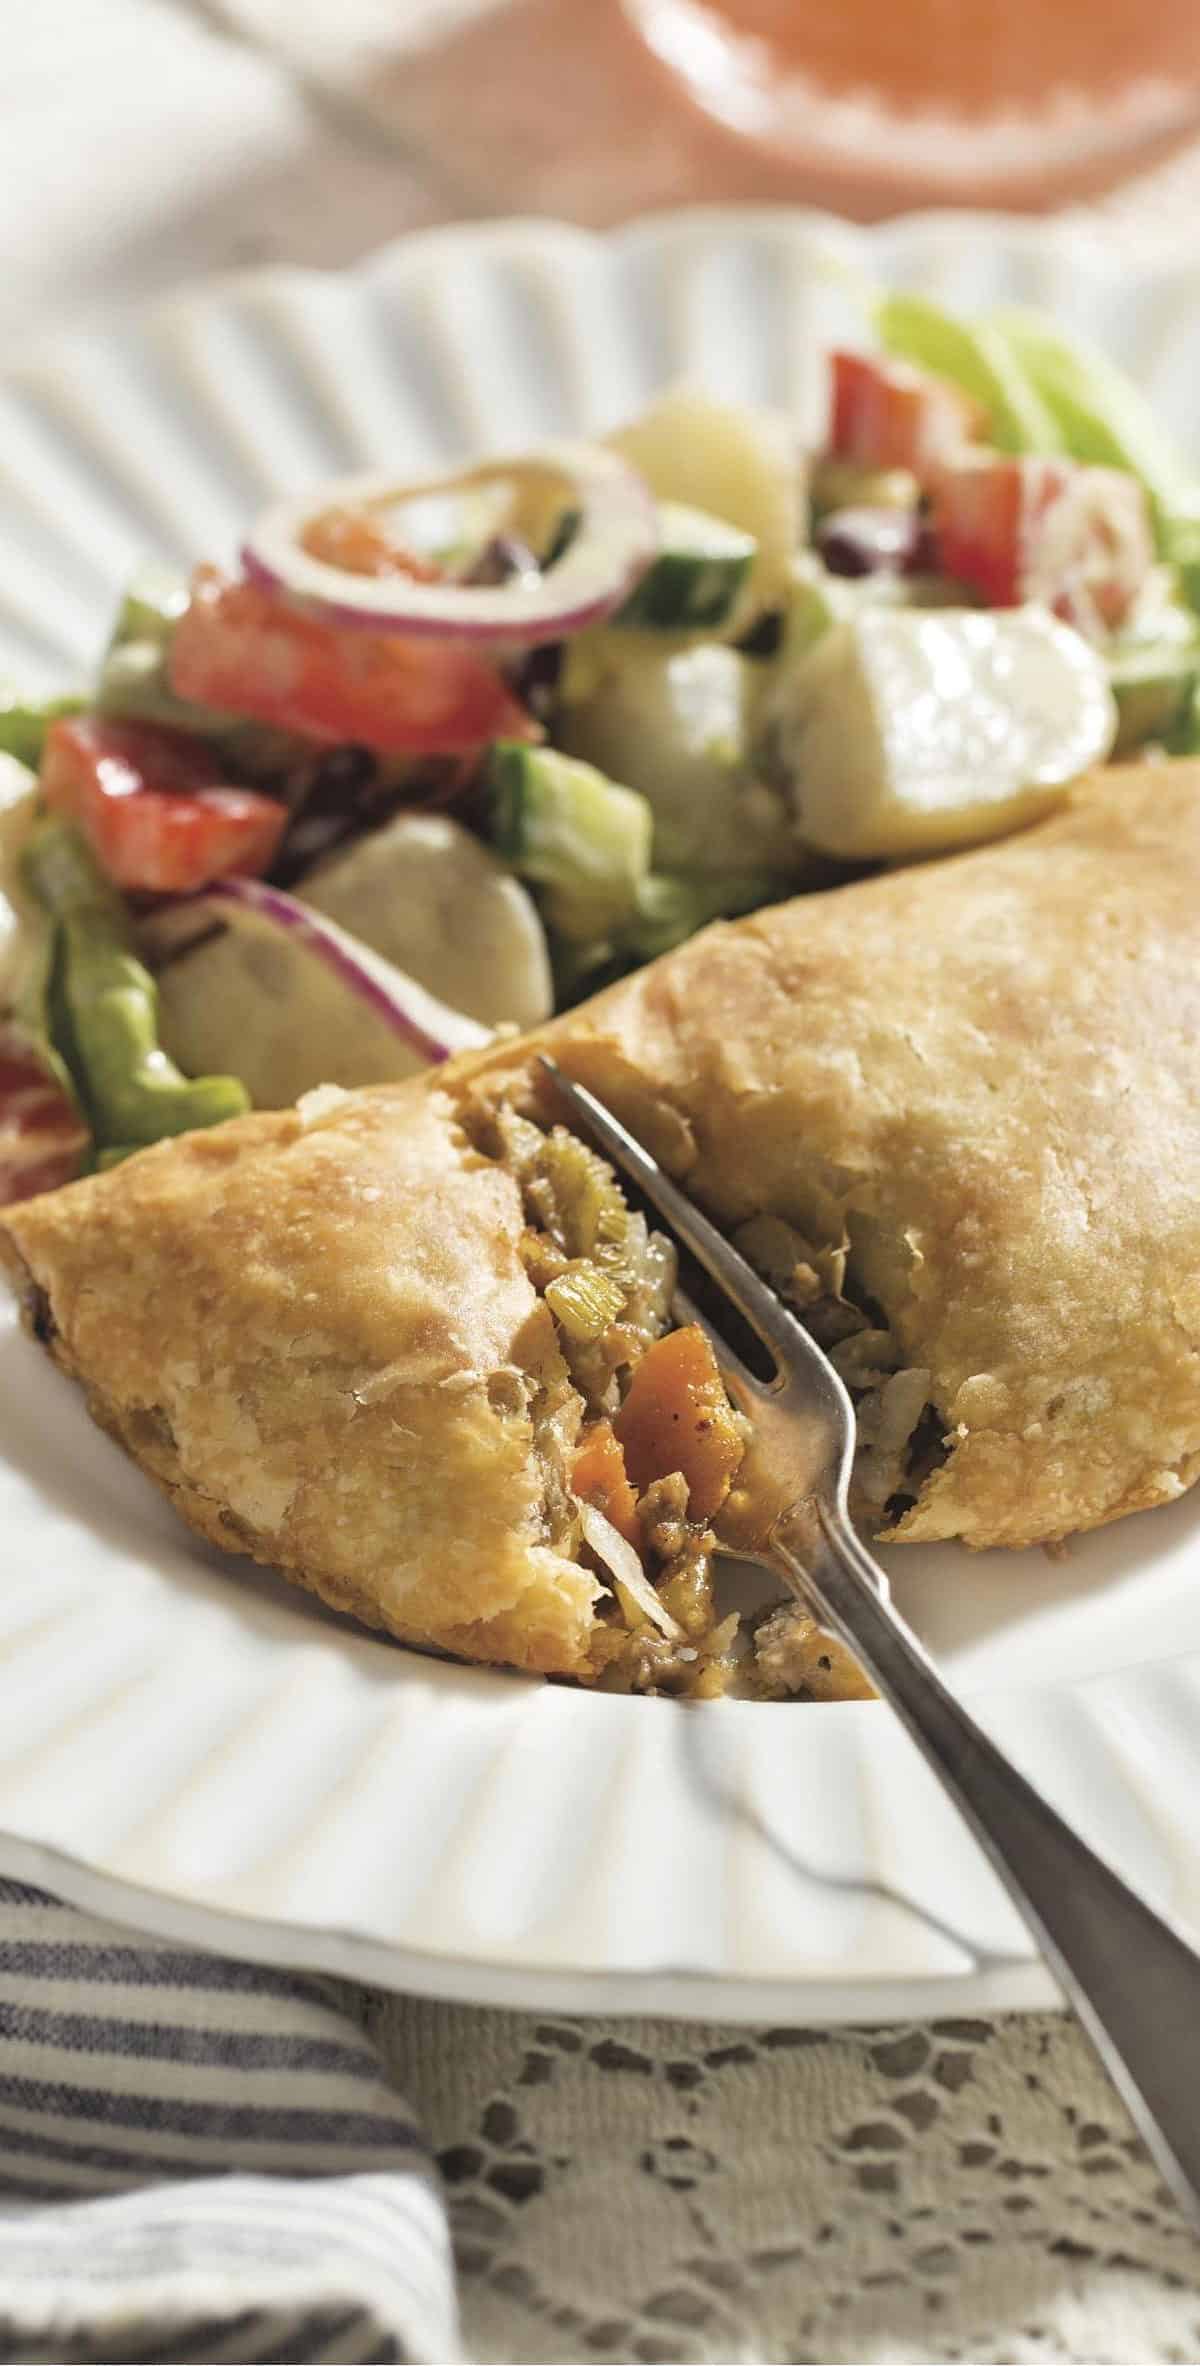  Bring a taste of Sweden to your dinner table with these delicious meat pies.